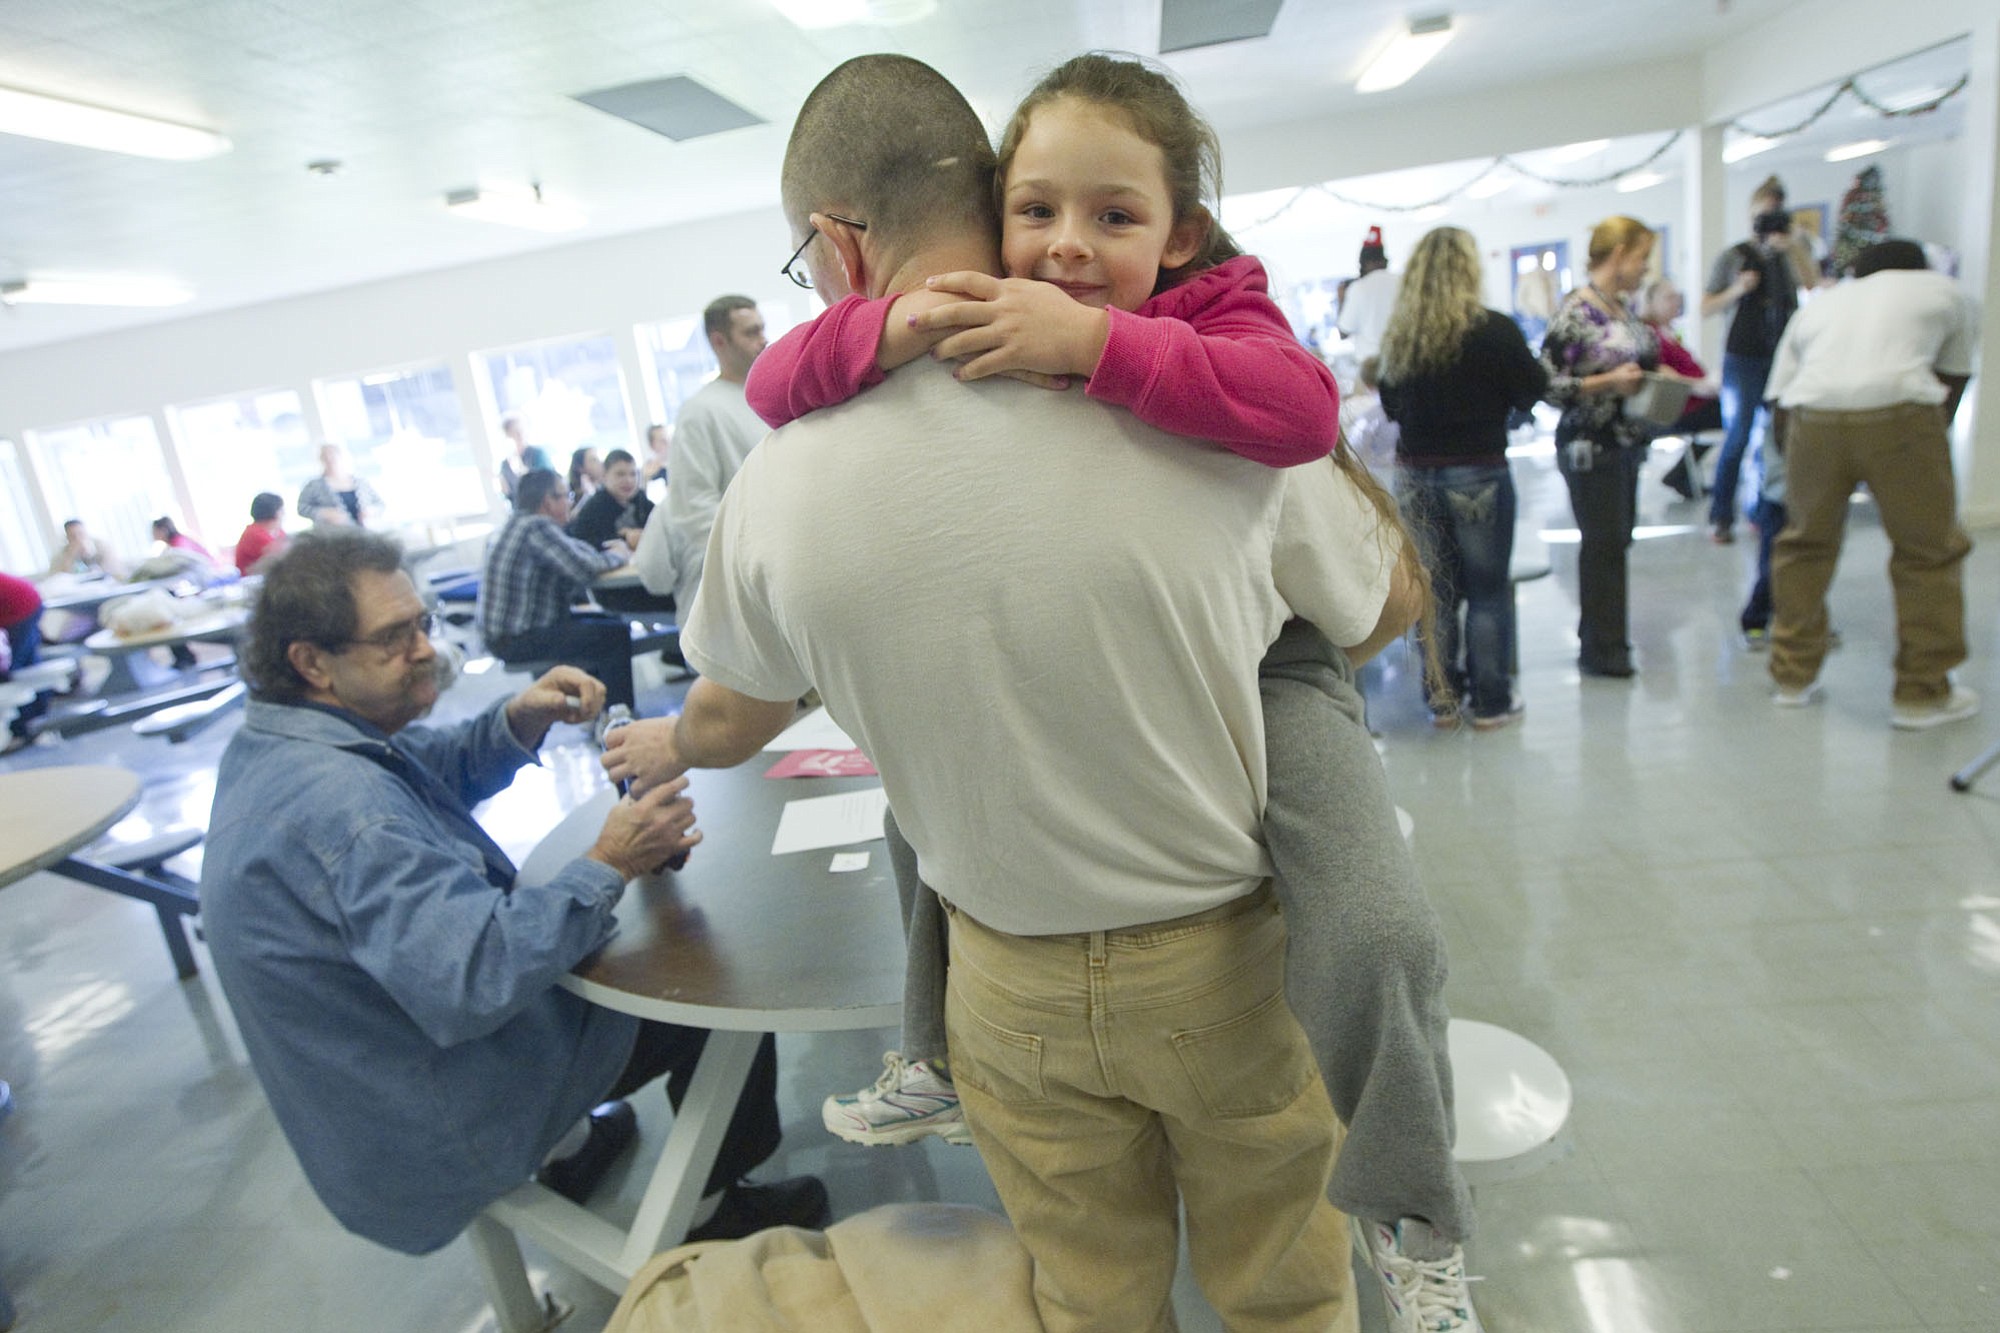 Inmate William Shelden's daughter Anglea holds on tightly to her father at the Larch Corrections Center in Yacolt Sunday December 14, 2014. Inmates and their families spent the afternoon celebrating Christmas with music, presents and a visit from Santa.